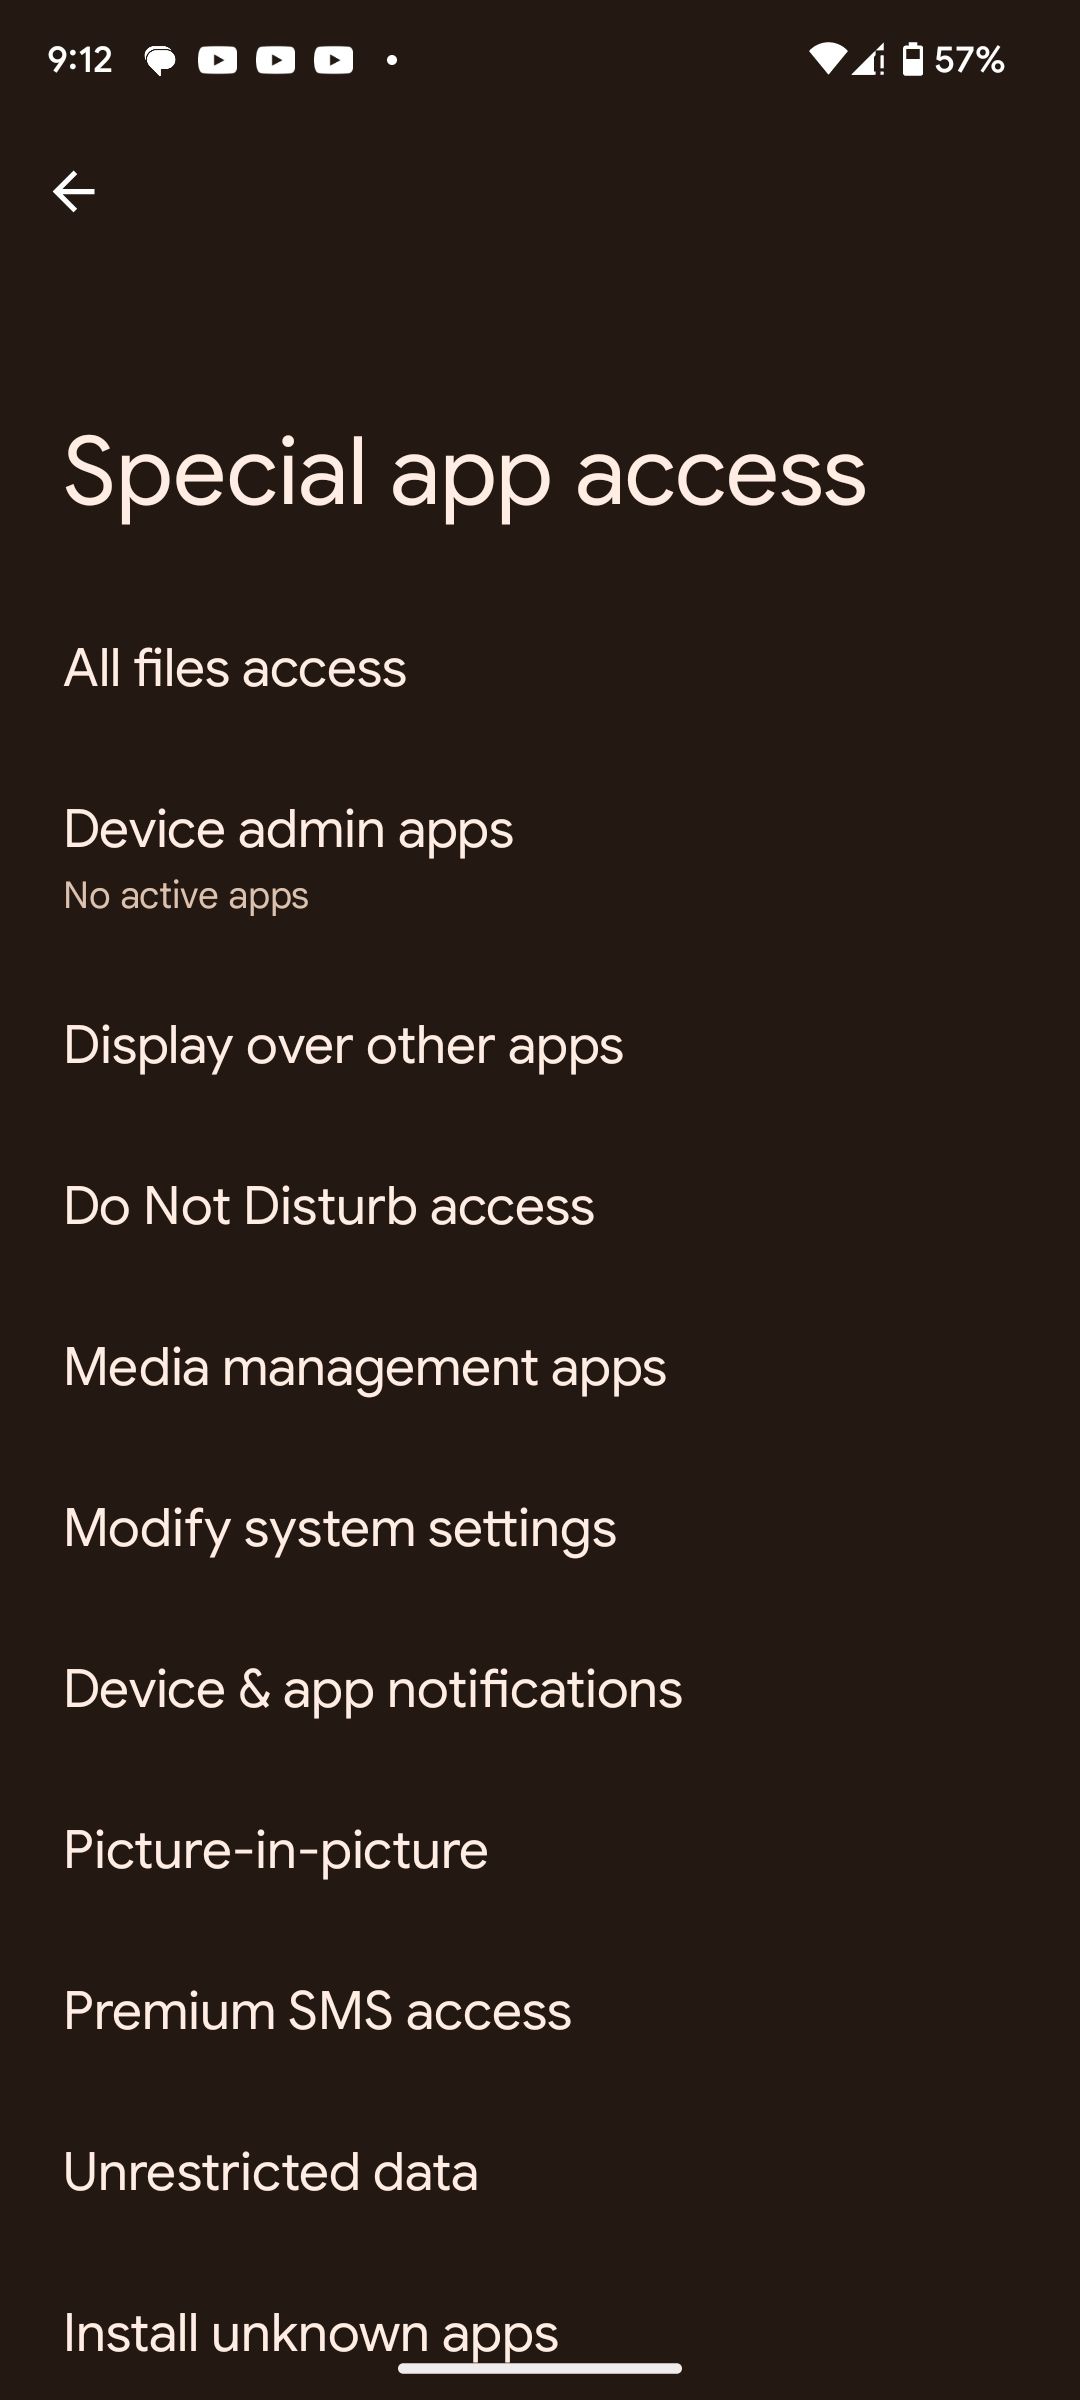 Special app access settings page on Android